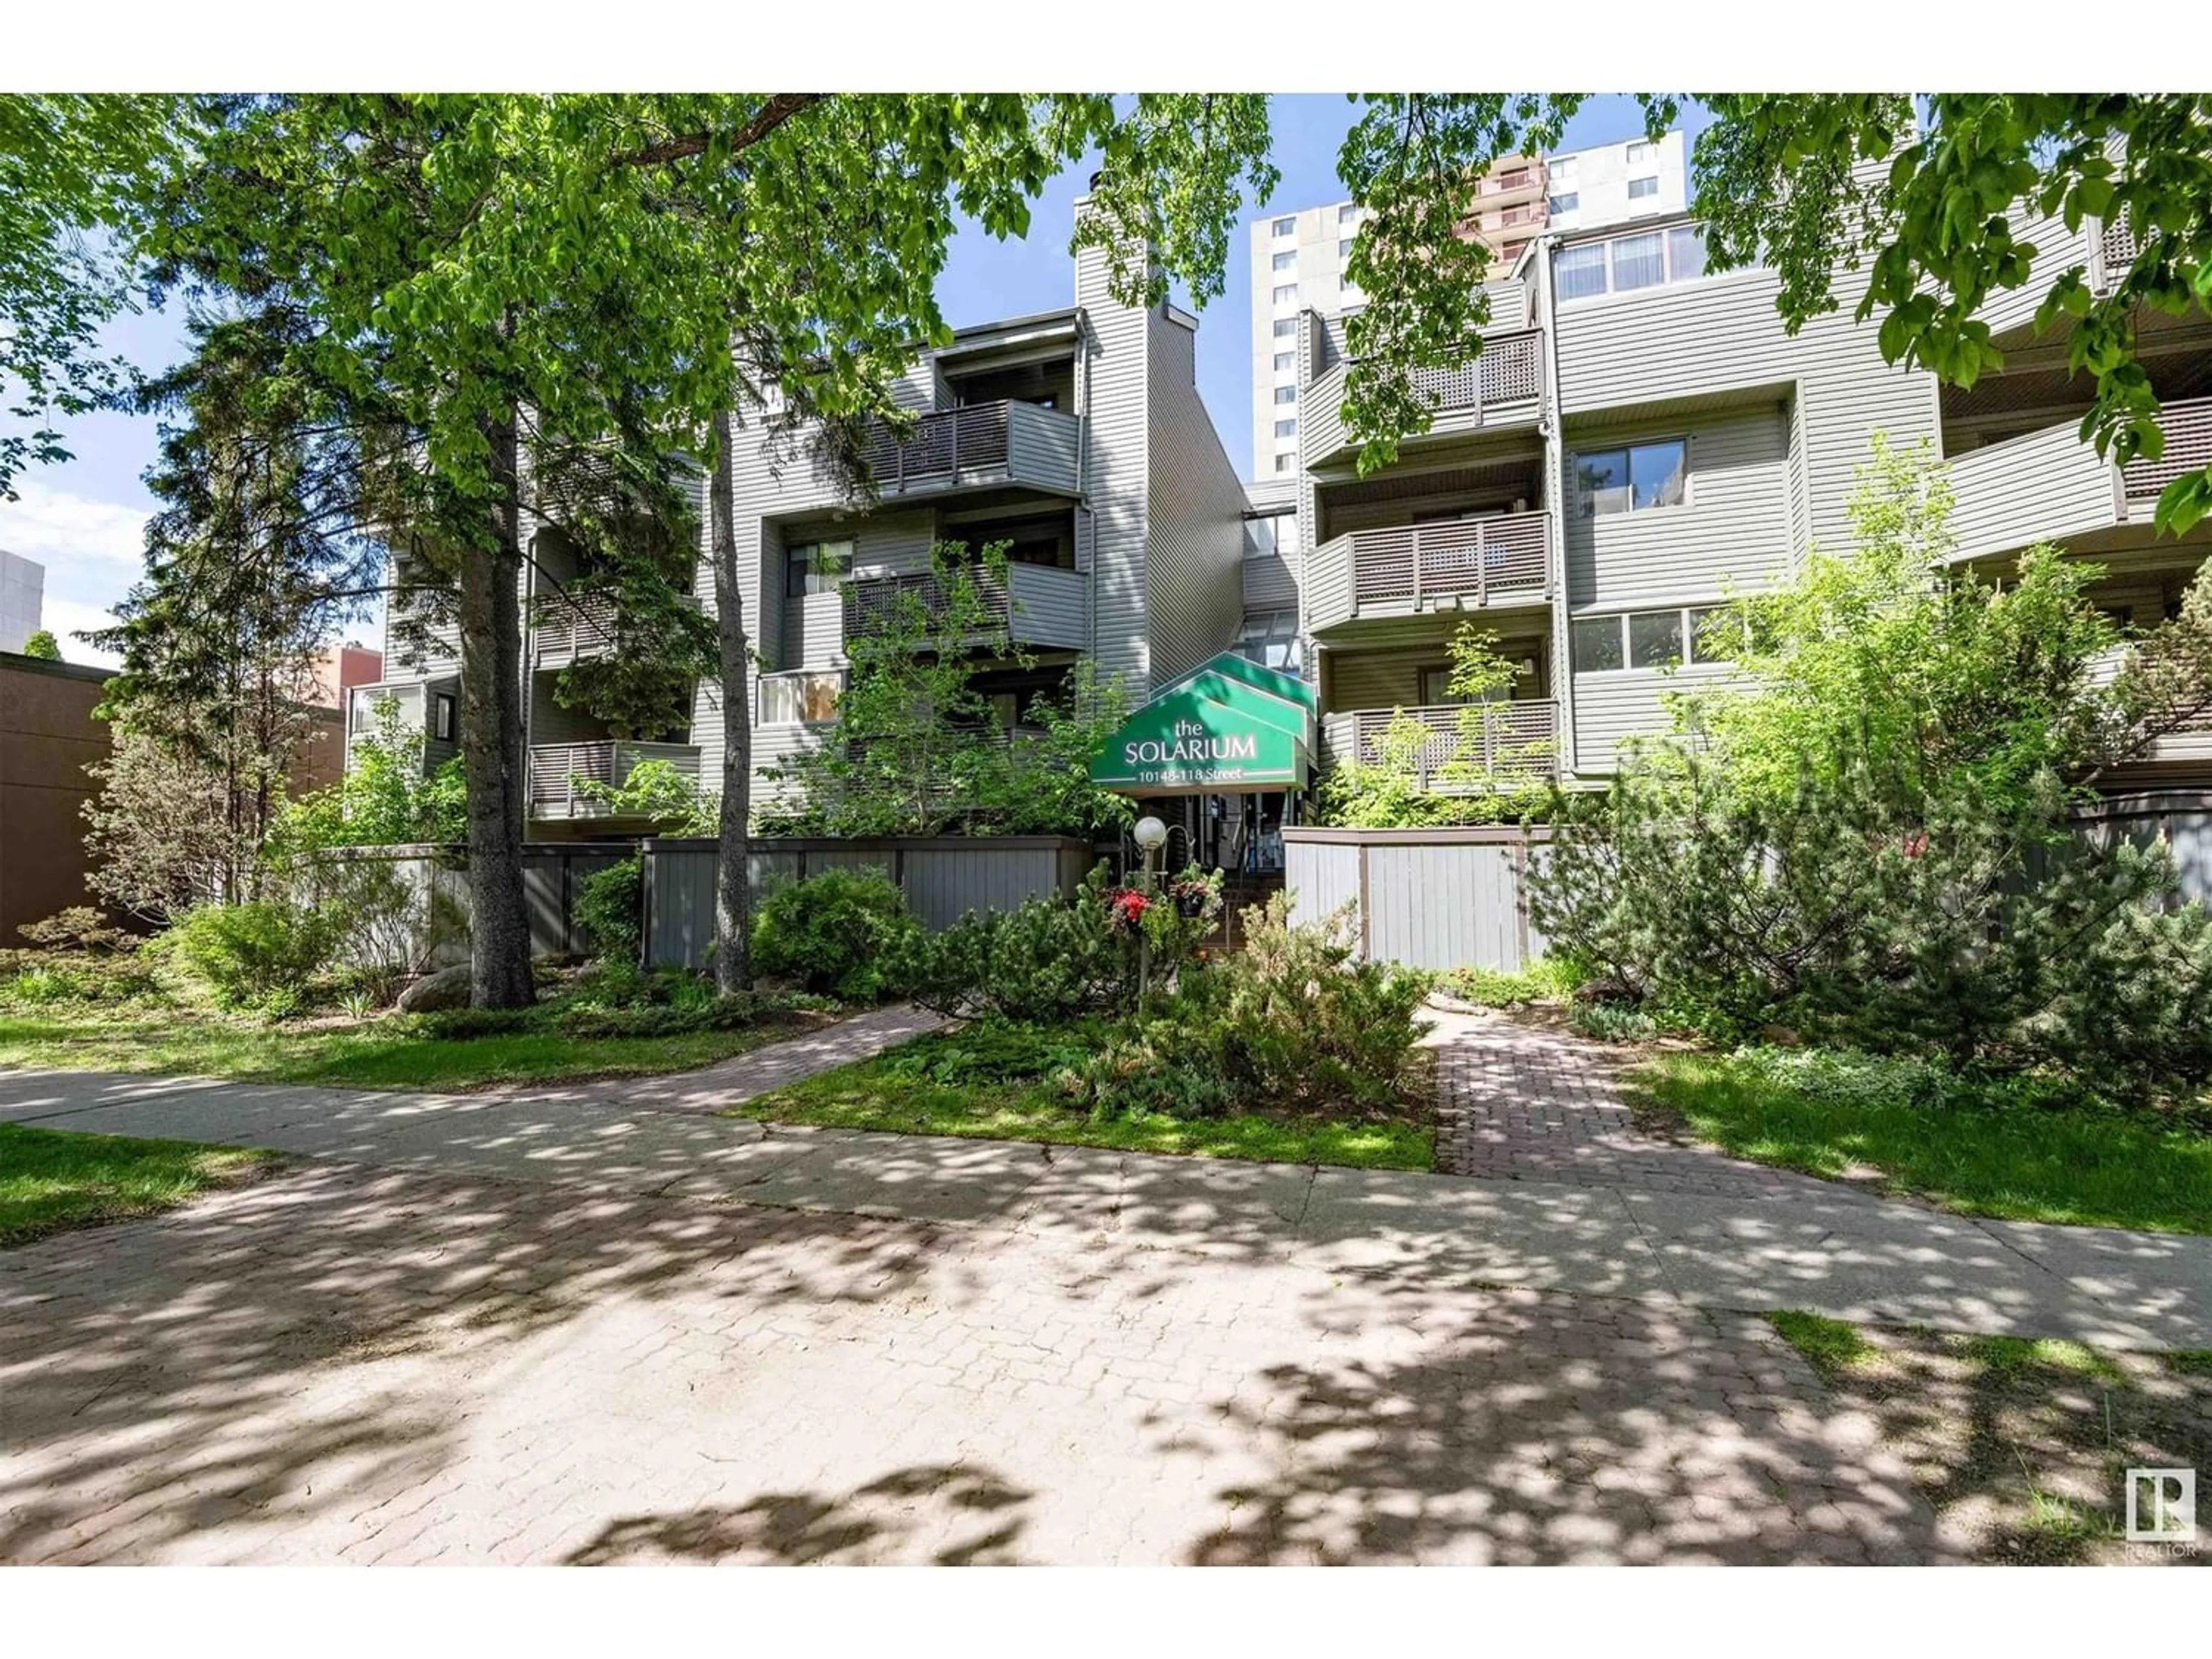 A pic from exterior of the house or condo for #309 10148 118 ST NW, Edmonton Alberta T5K1Y4